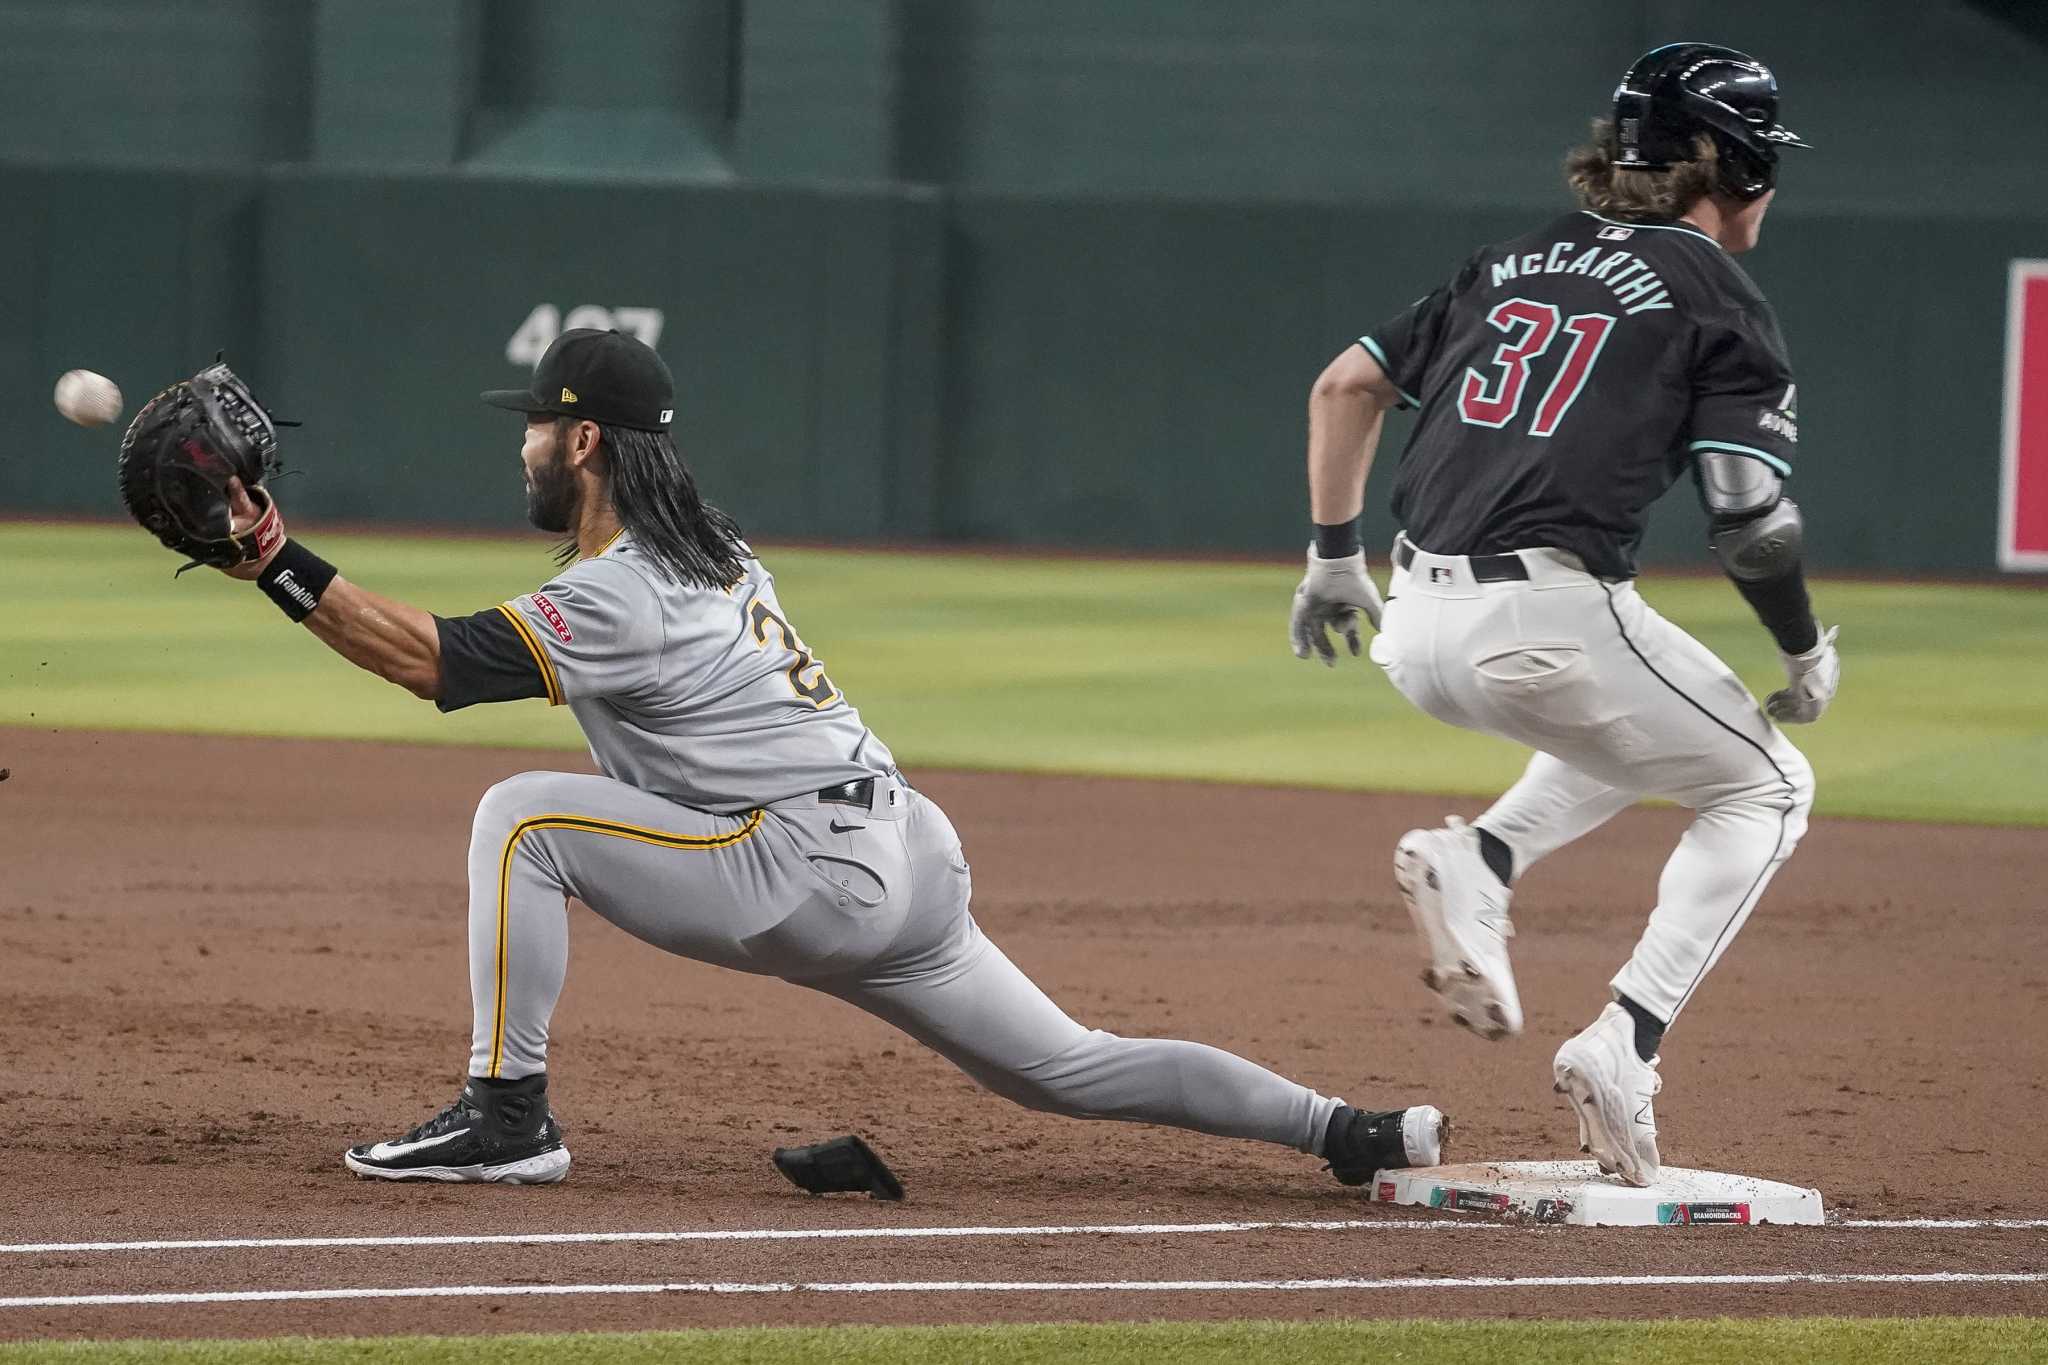 Ketel Marte drives in 3, Diamondbacks stretch winning streak to 4 with 9-5 victory over Pirates